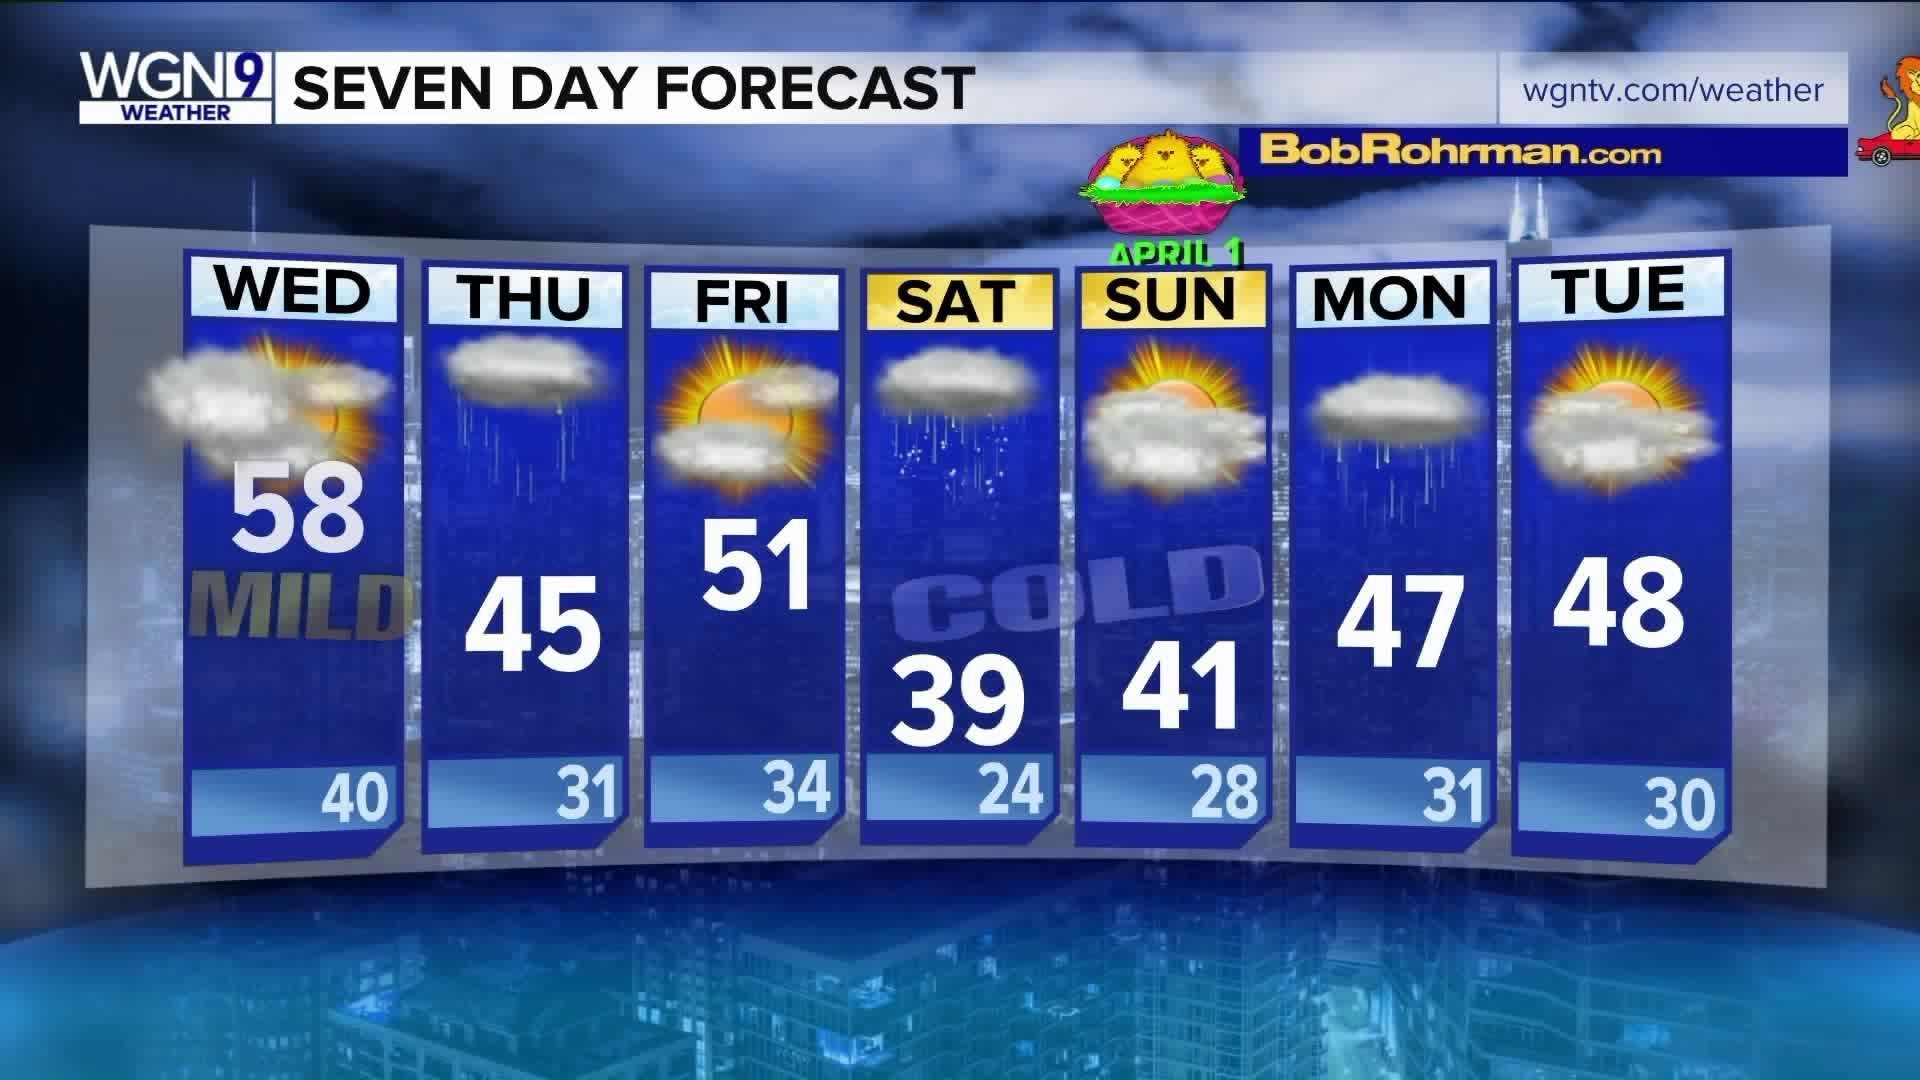 7-day forecast: Mix of weather for the week - Chicago Tribune 15 day forecast for chicago